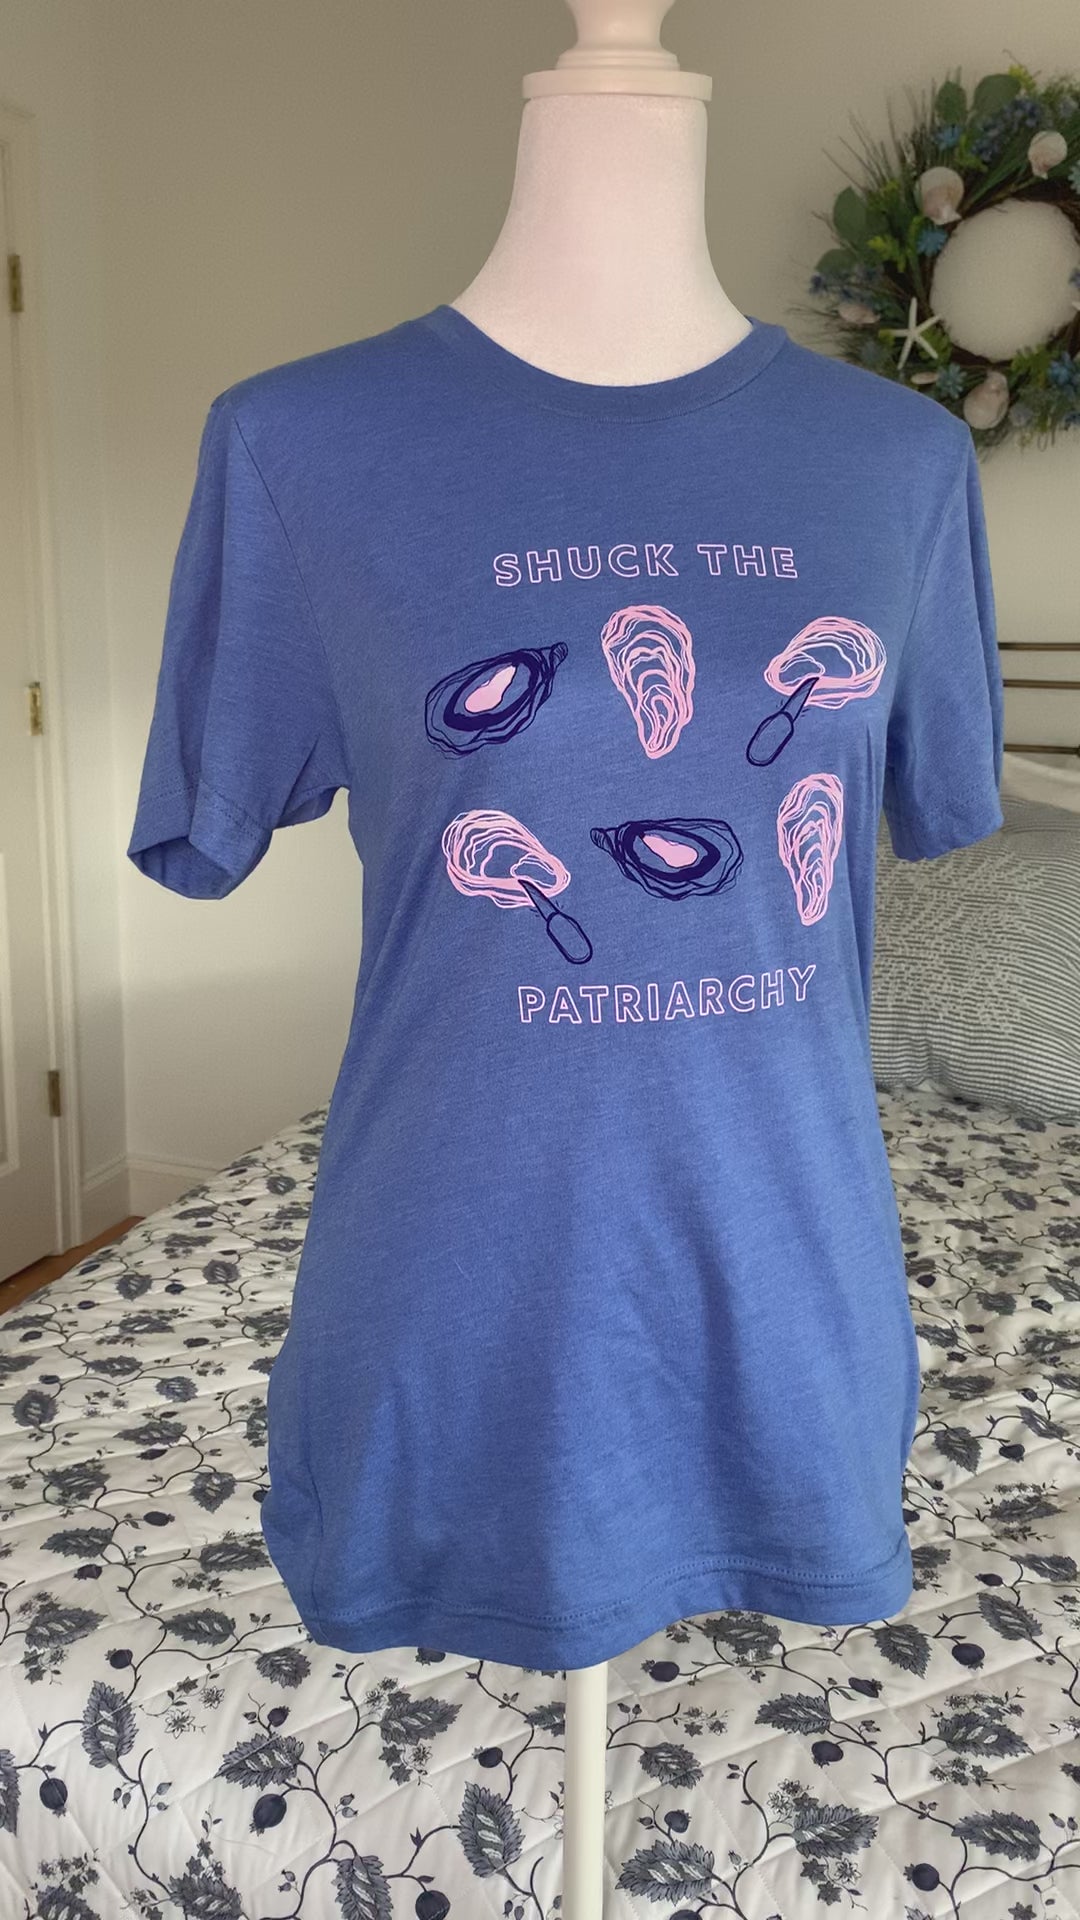 A bright blue tee that reads "Shuck the Patriarchy" in block letters hangs on a manikin